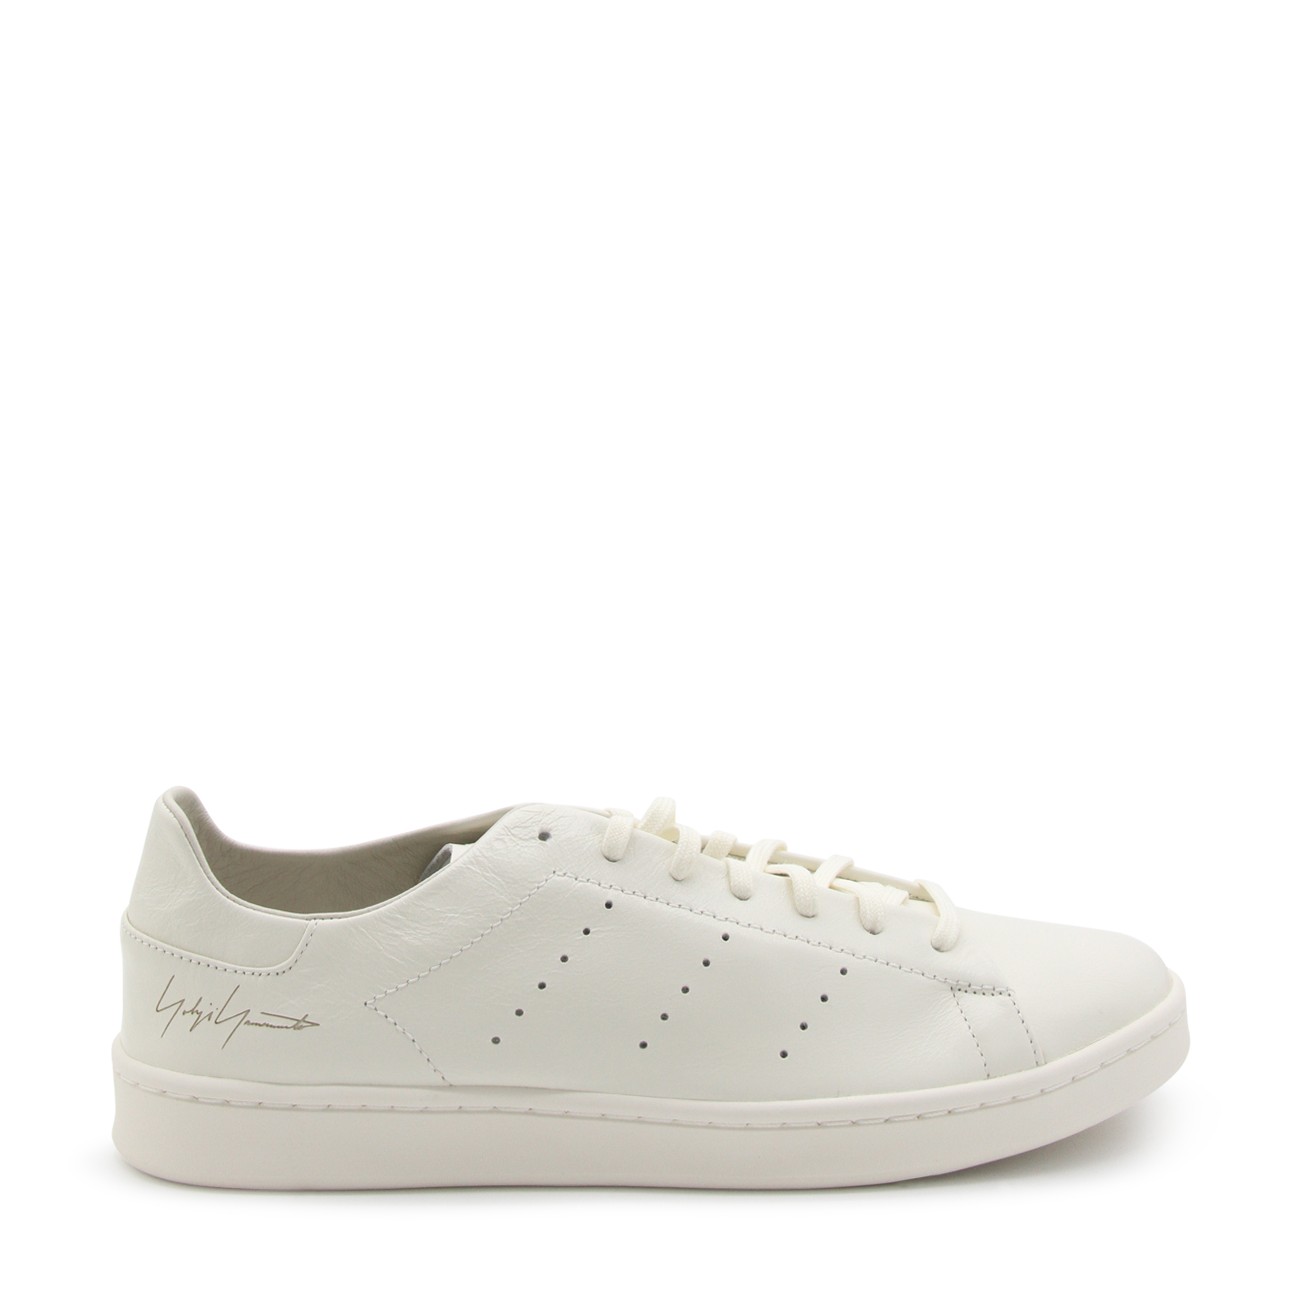 Buy Adidas VL Court 2.0 White Sneakers for Men at Best Price @ Tata CLiQ